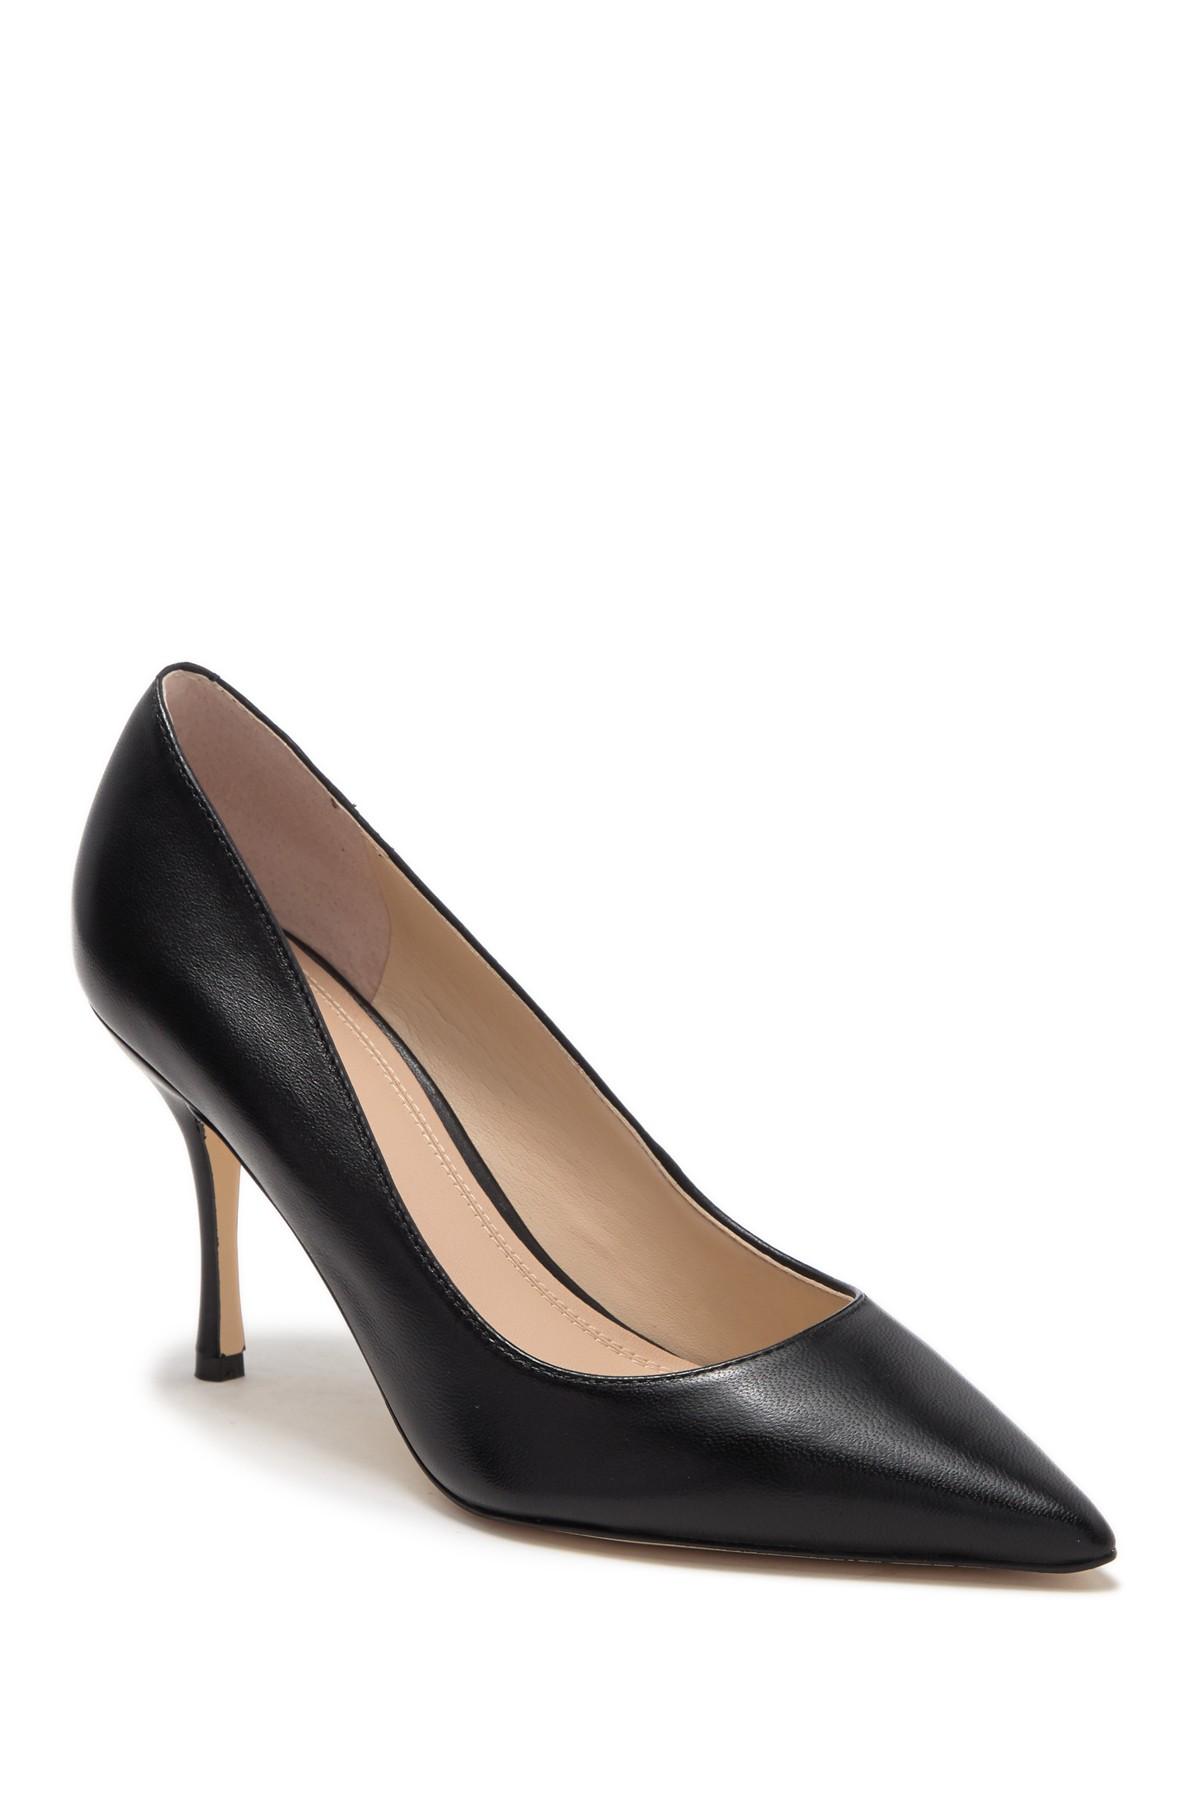 Marc Fisher Carter Classic Leather Pumps in Black - Save 11% - Lyst